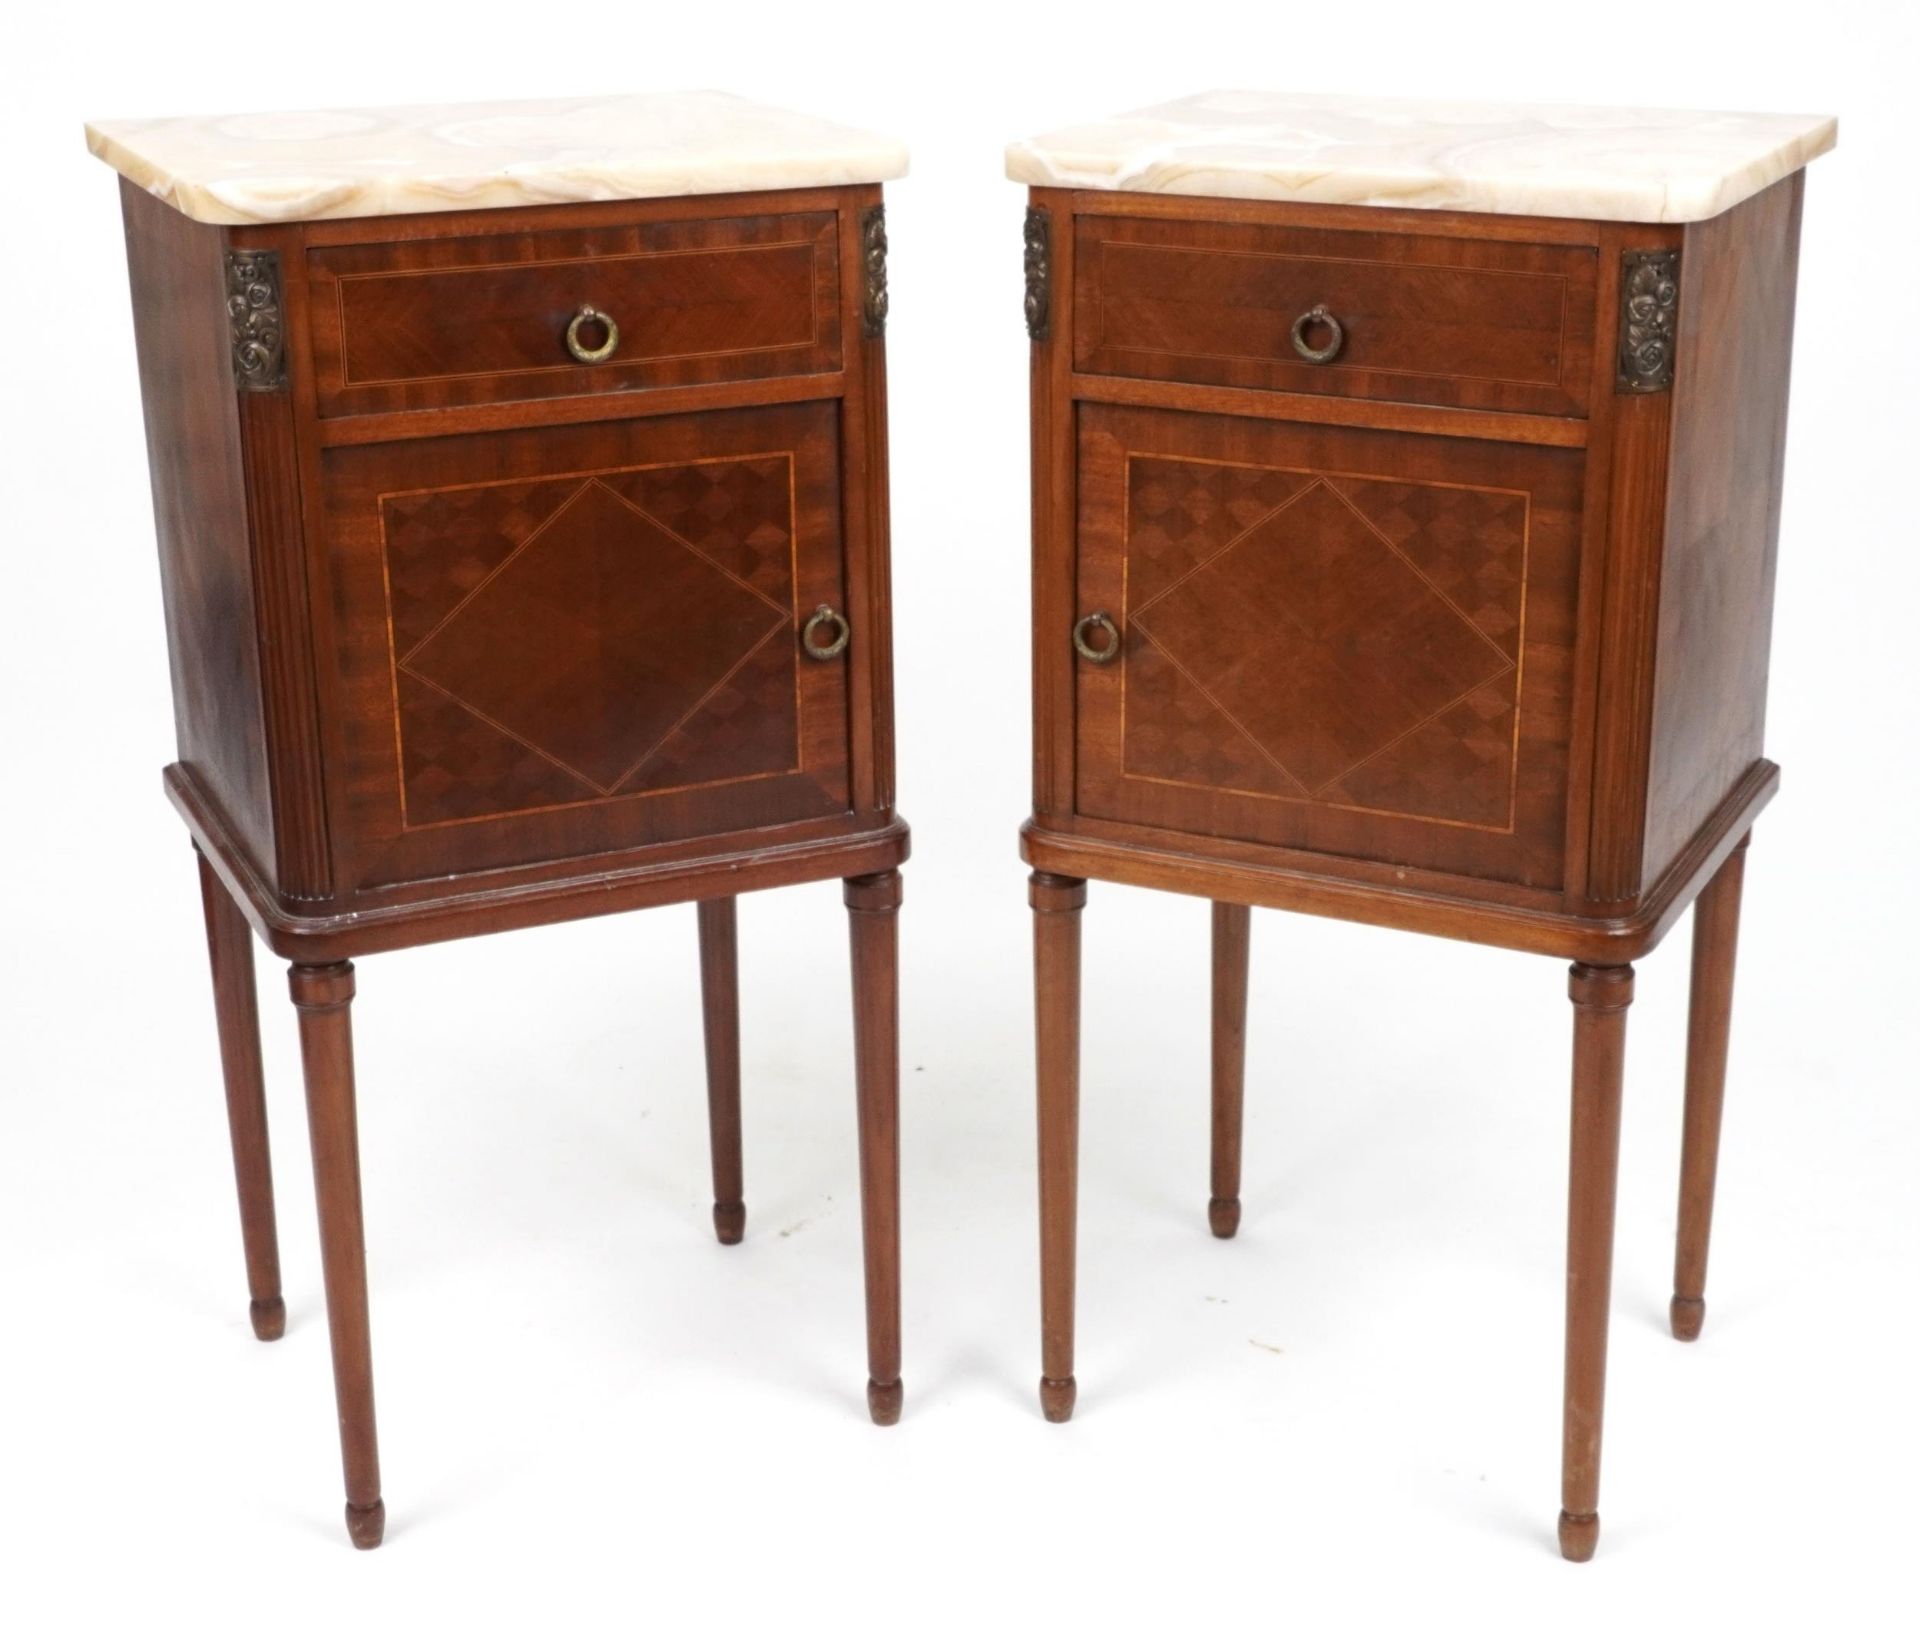 Pair of French inlaid mahogany nightstands with marble tops and brass mounts, 90cm H x 45cm W x 37cm